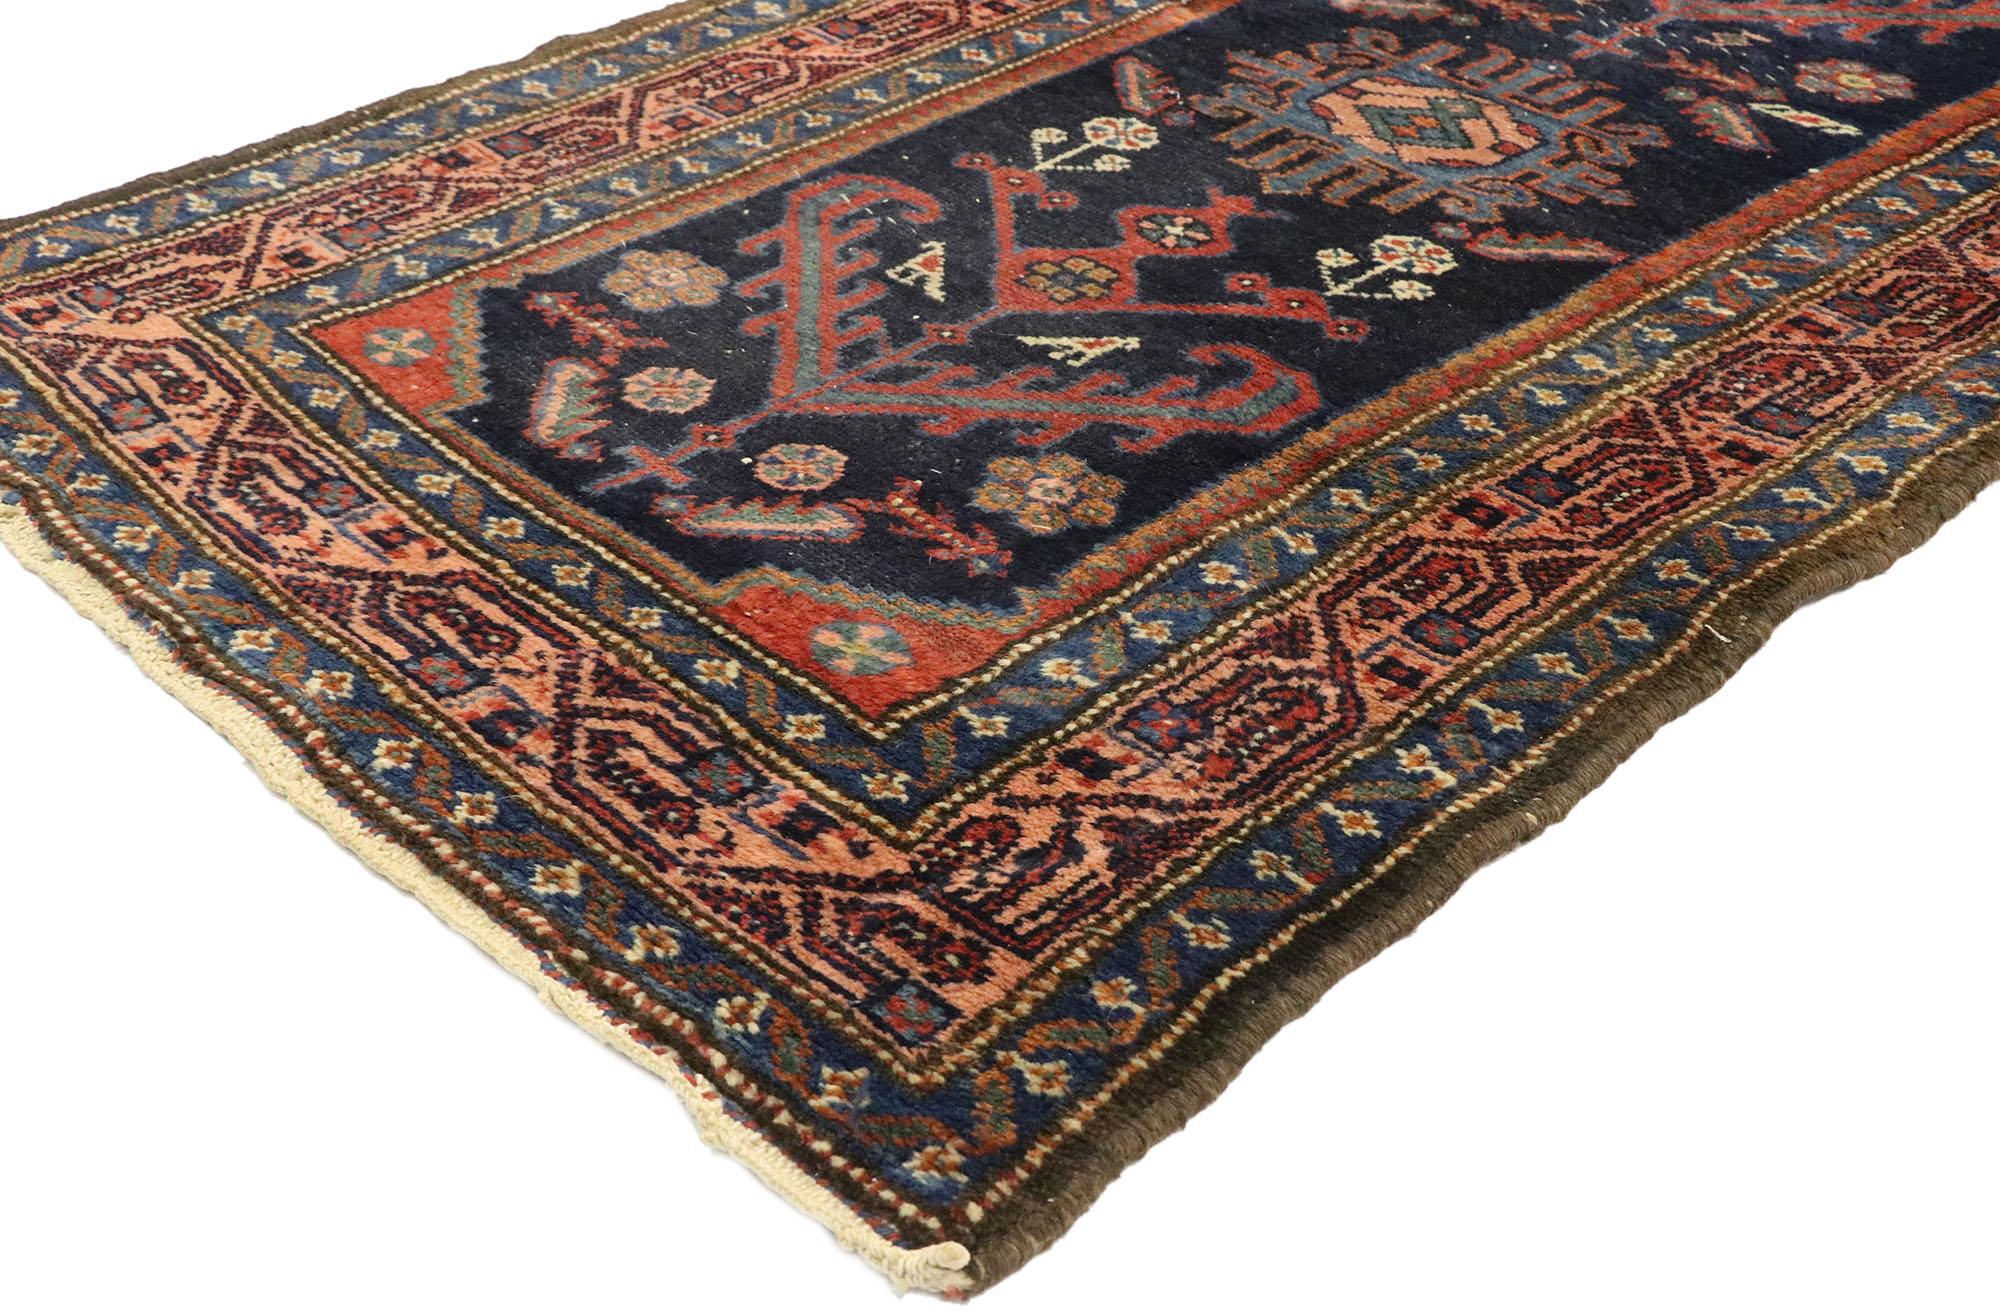 77500, antique Persian Malayer runner with Mid-Century Modern style, extra-long hallway runner 02'08 x 19'10. With its geometric botanical design and mesmerizing well-balanced symmetry, this hand knotted wool antique Persian Malayer runner would